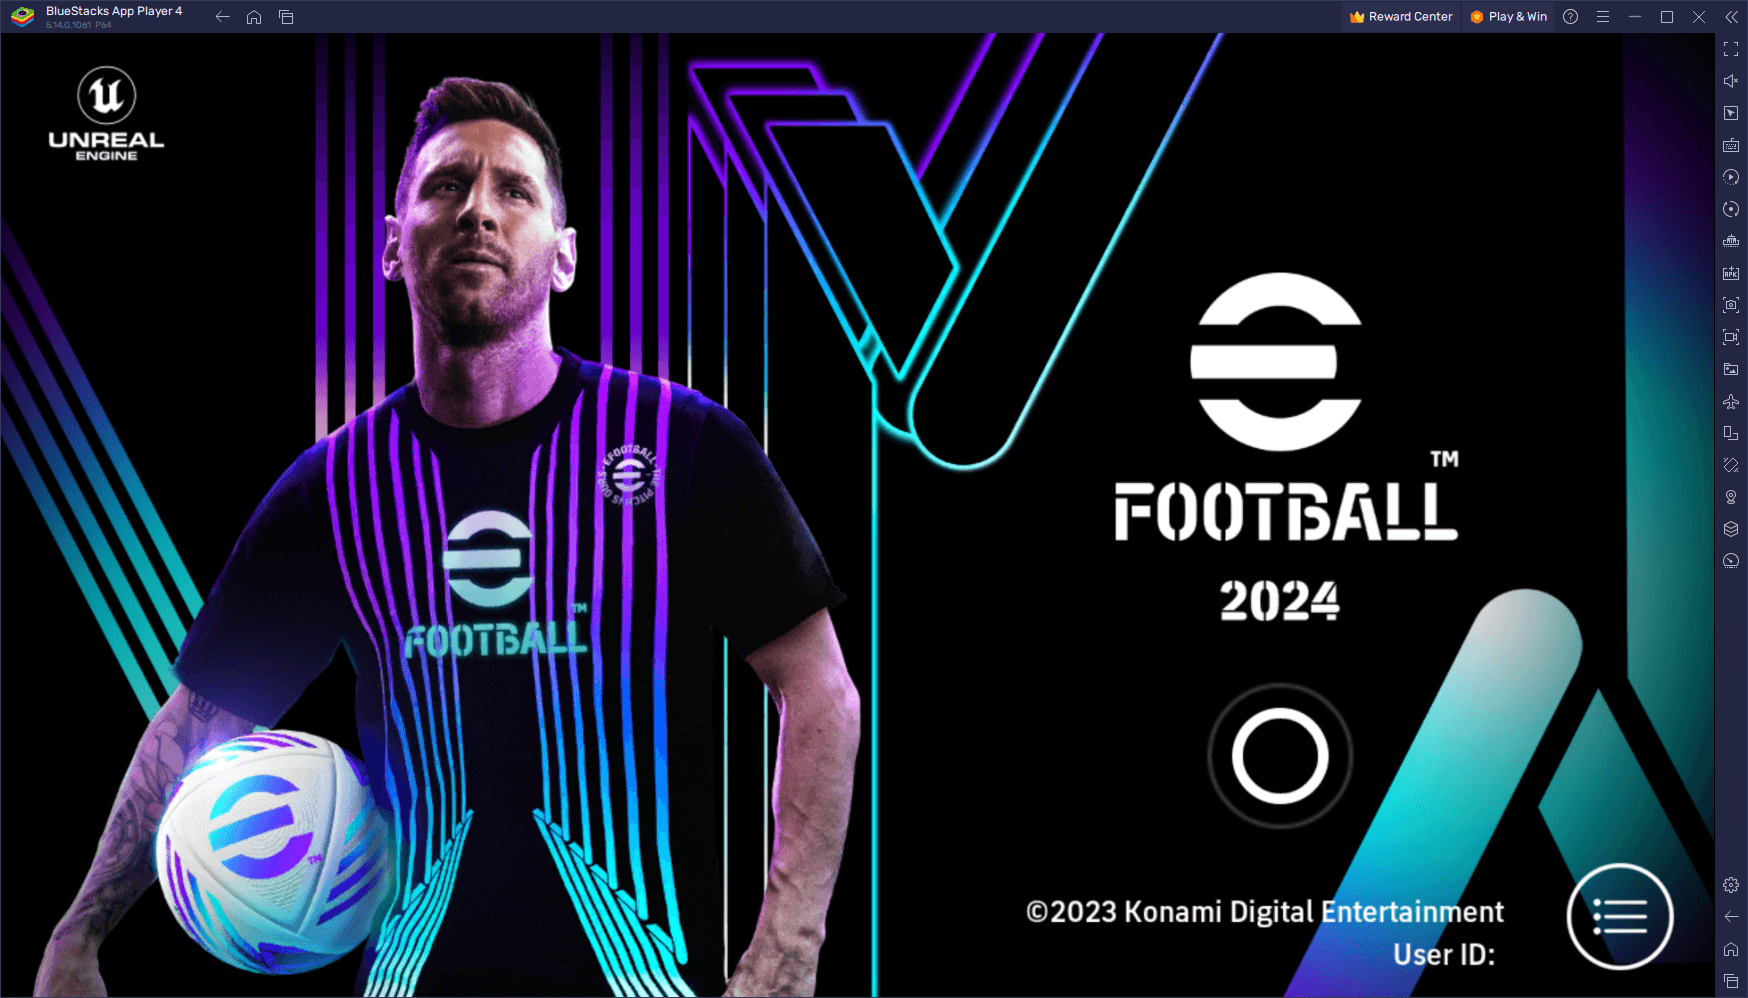 Unlock 60 FPS in eFootball 2024 on BlueStacks - A Step-by-Step Performance Guide